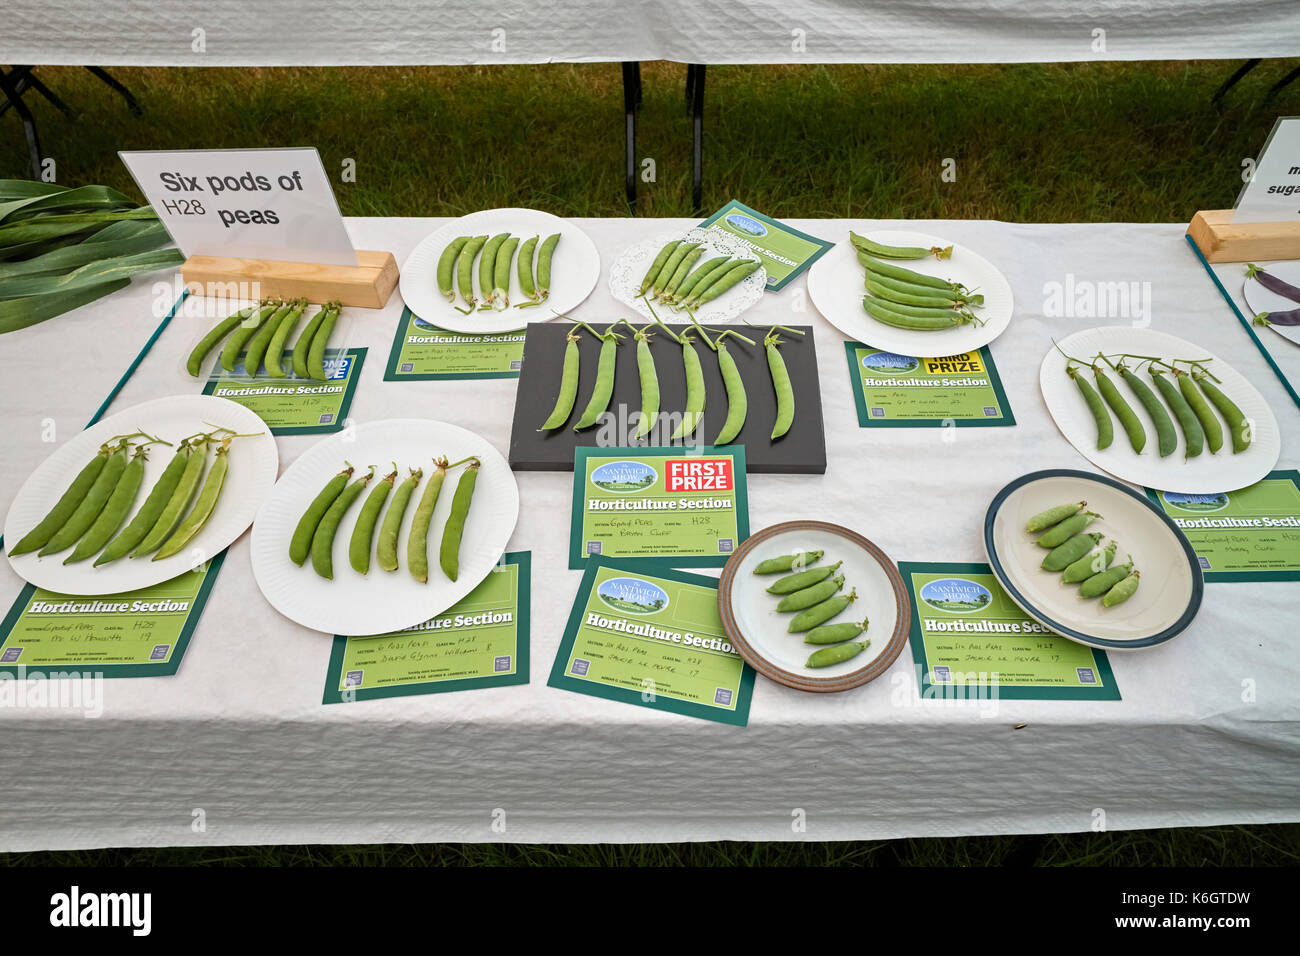 Six pods of peas at Nantwich agricultural show Stock Photo